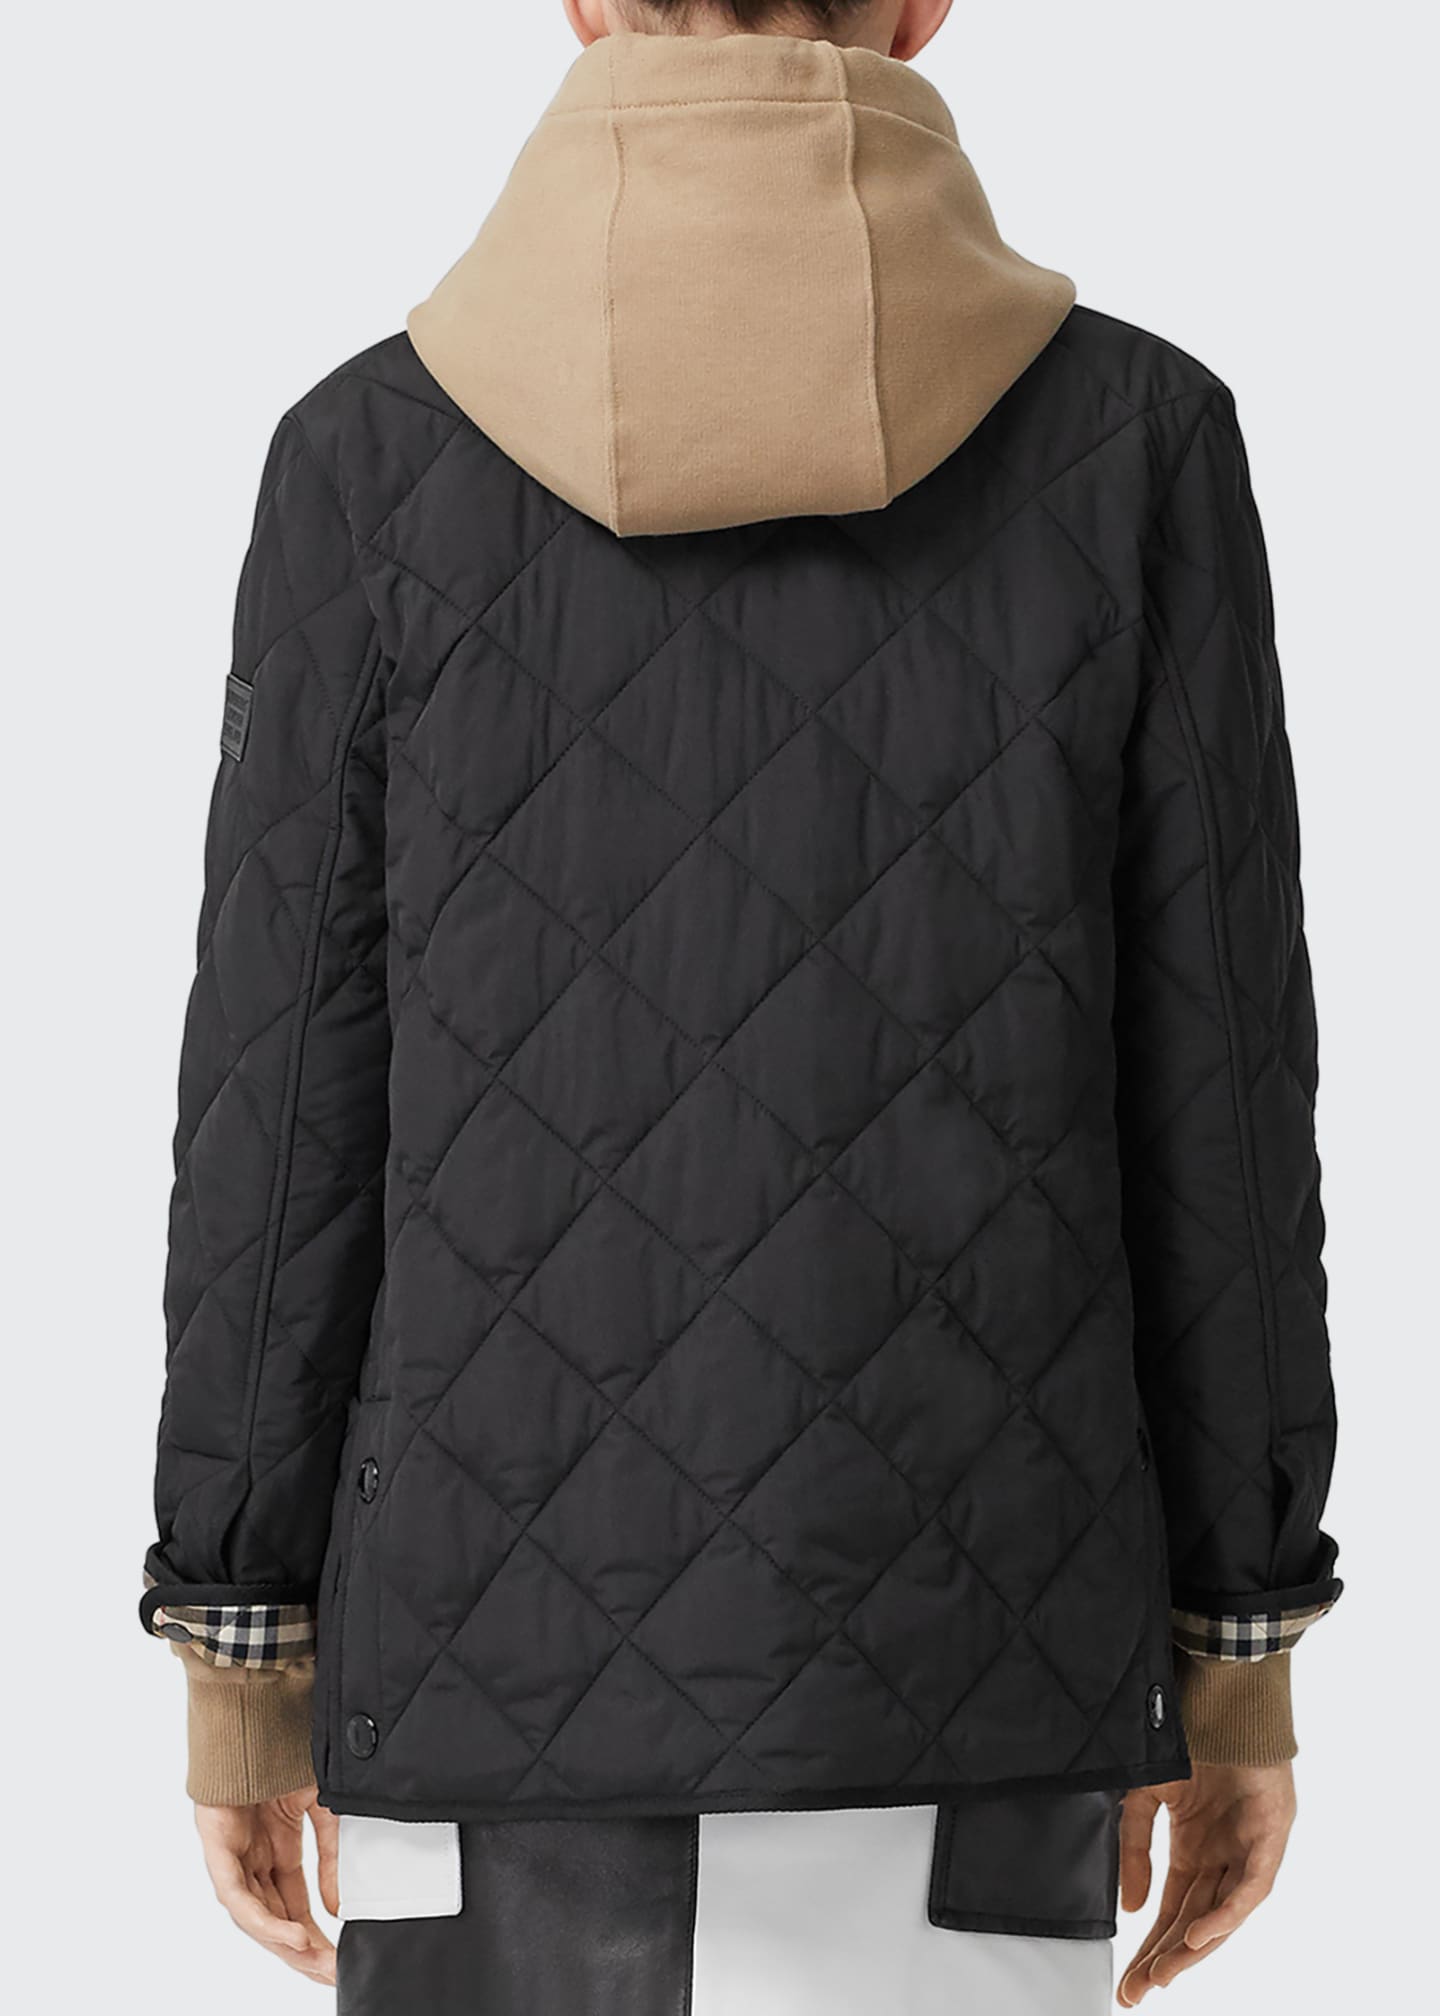 Burberry Cotswold Quilted Barn Jacket, Black - Bergdorf Goodman